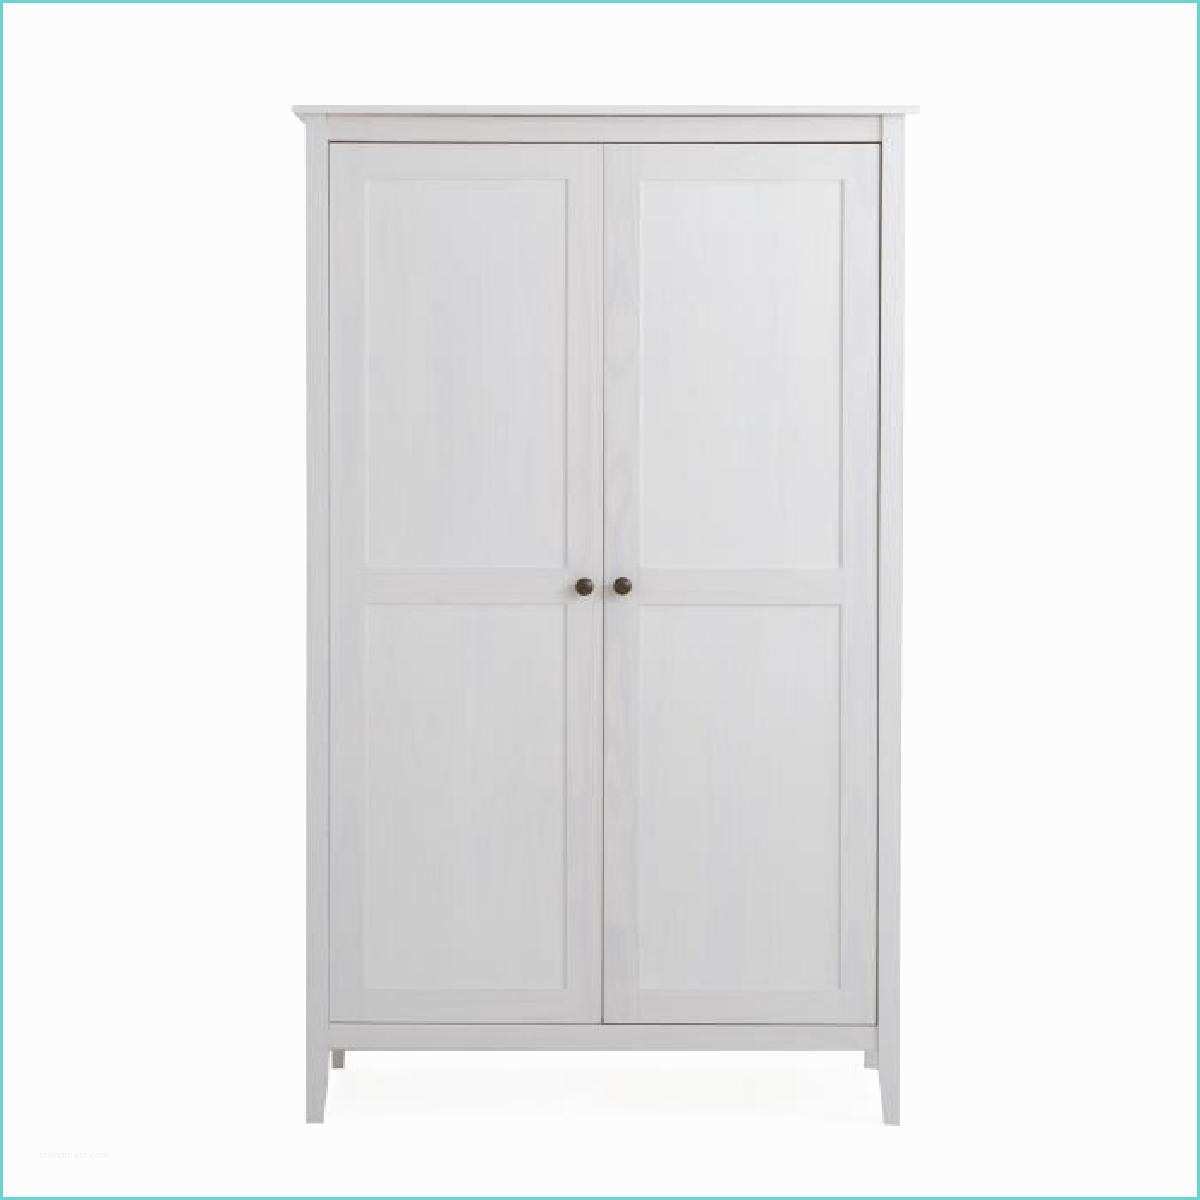 Armoire Fille Pas Cher Affordable Gallery Of Armoire Blanche Porte Collection